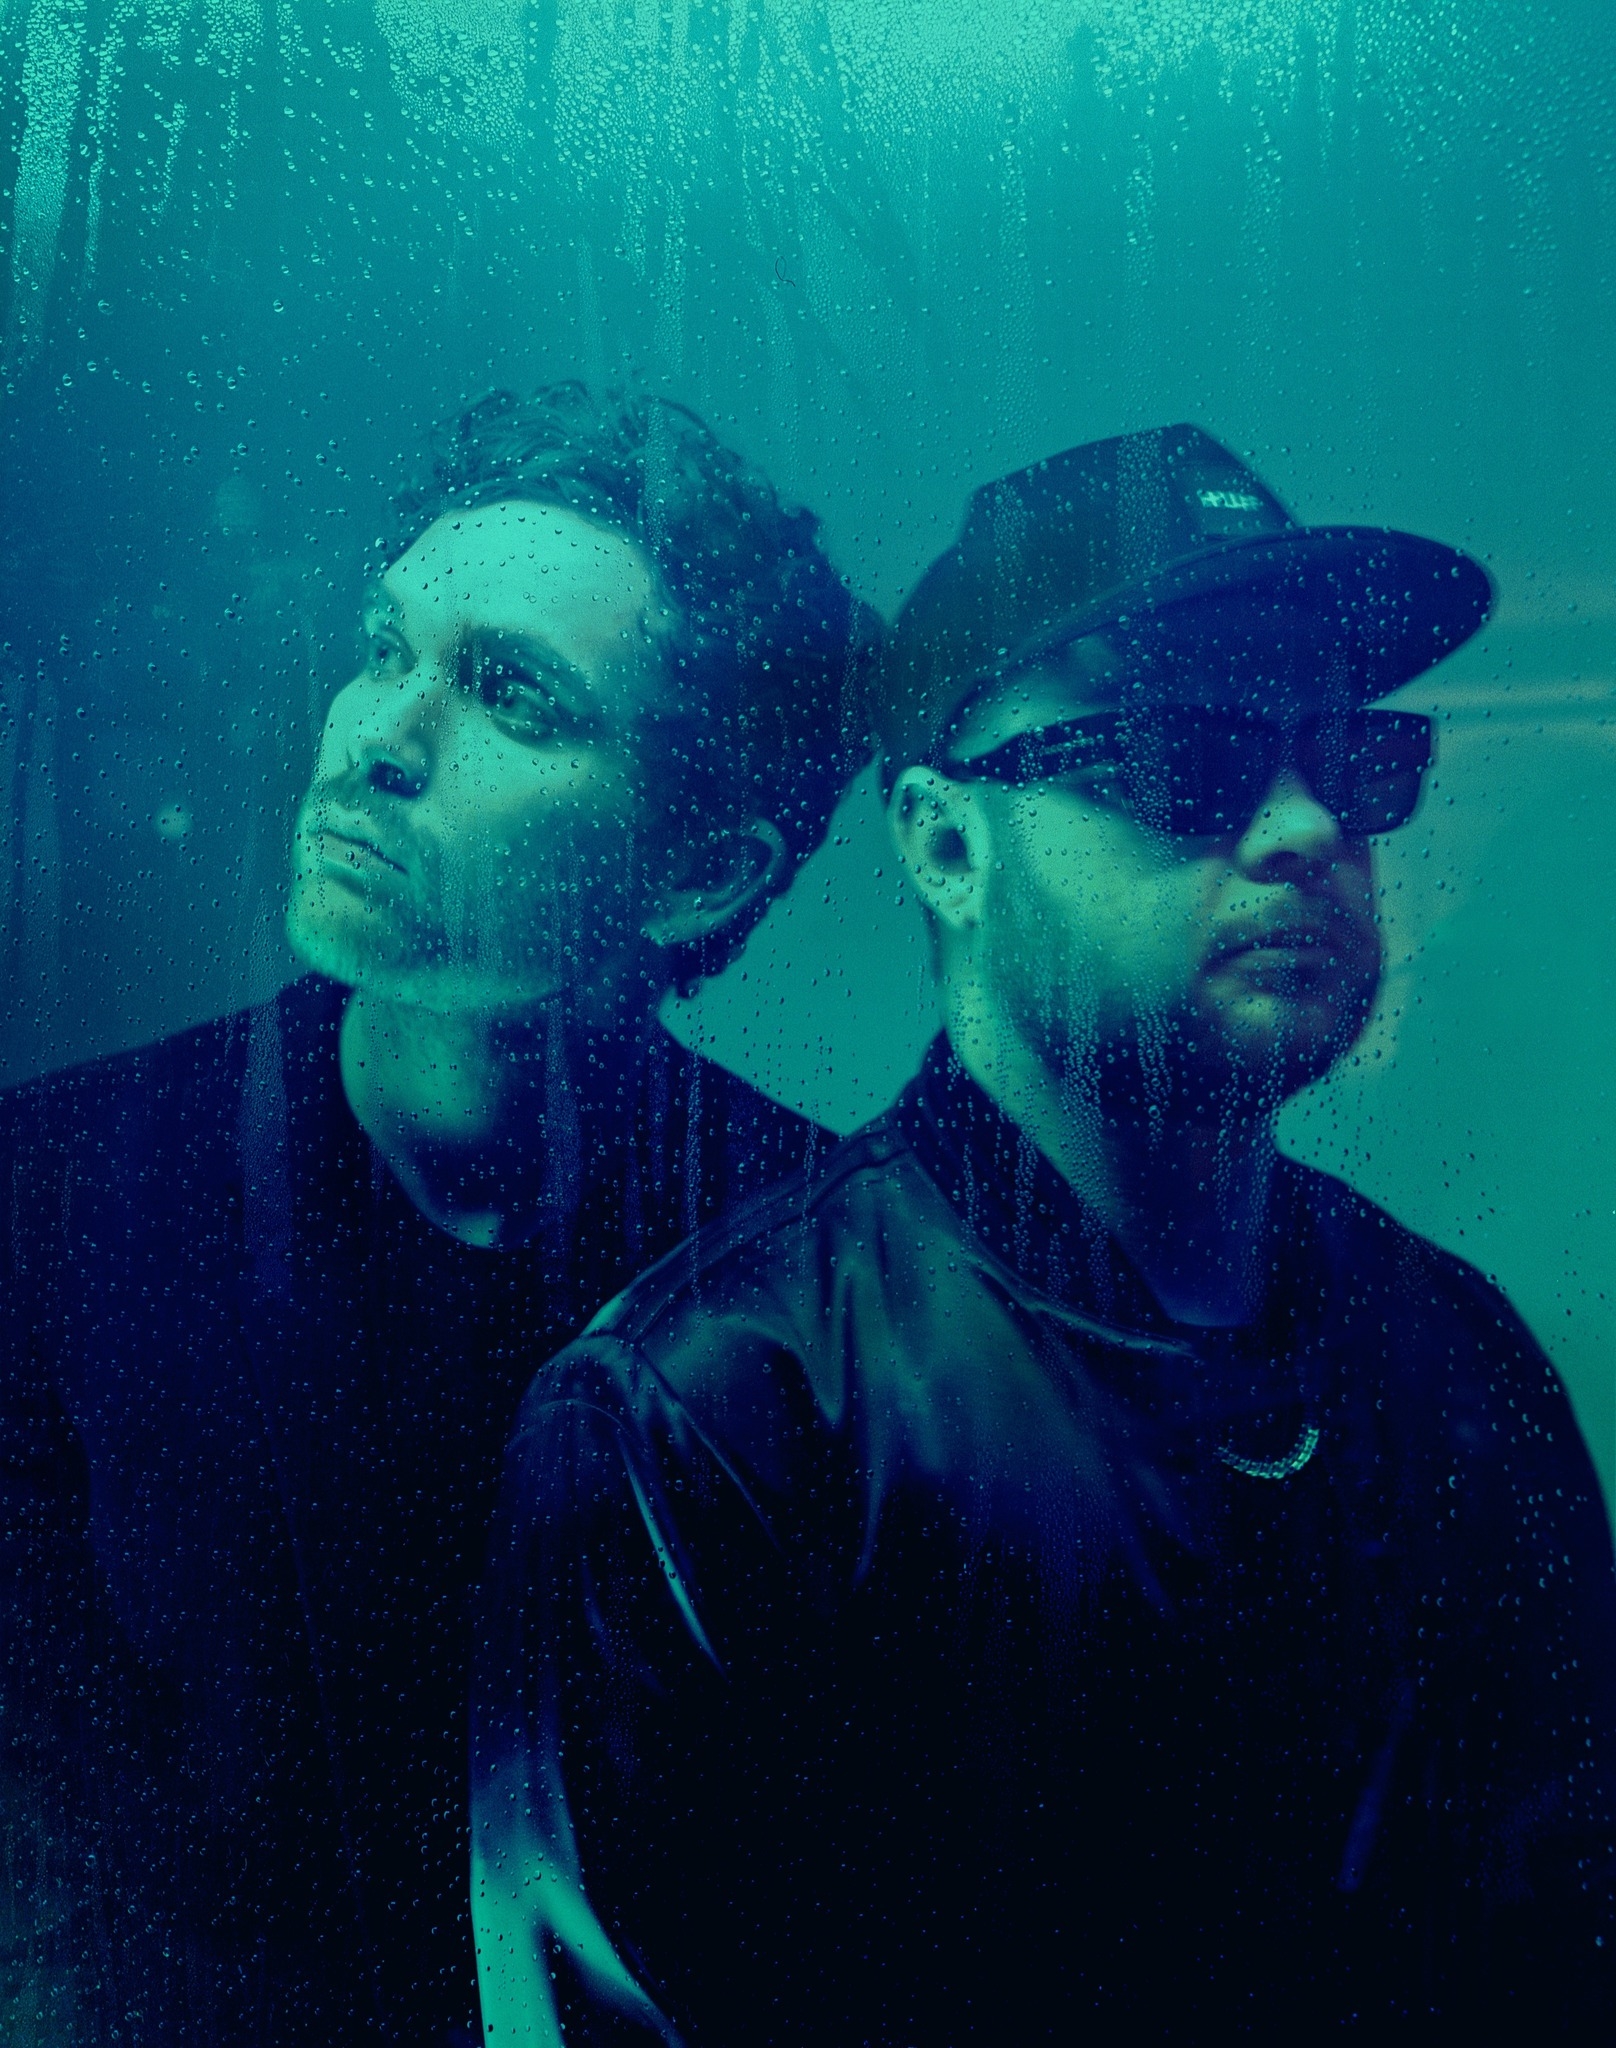 ROYAL BLOOD THE NEW SINGLE ‘MOUNTAINS AT MIDNIGHT’